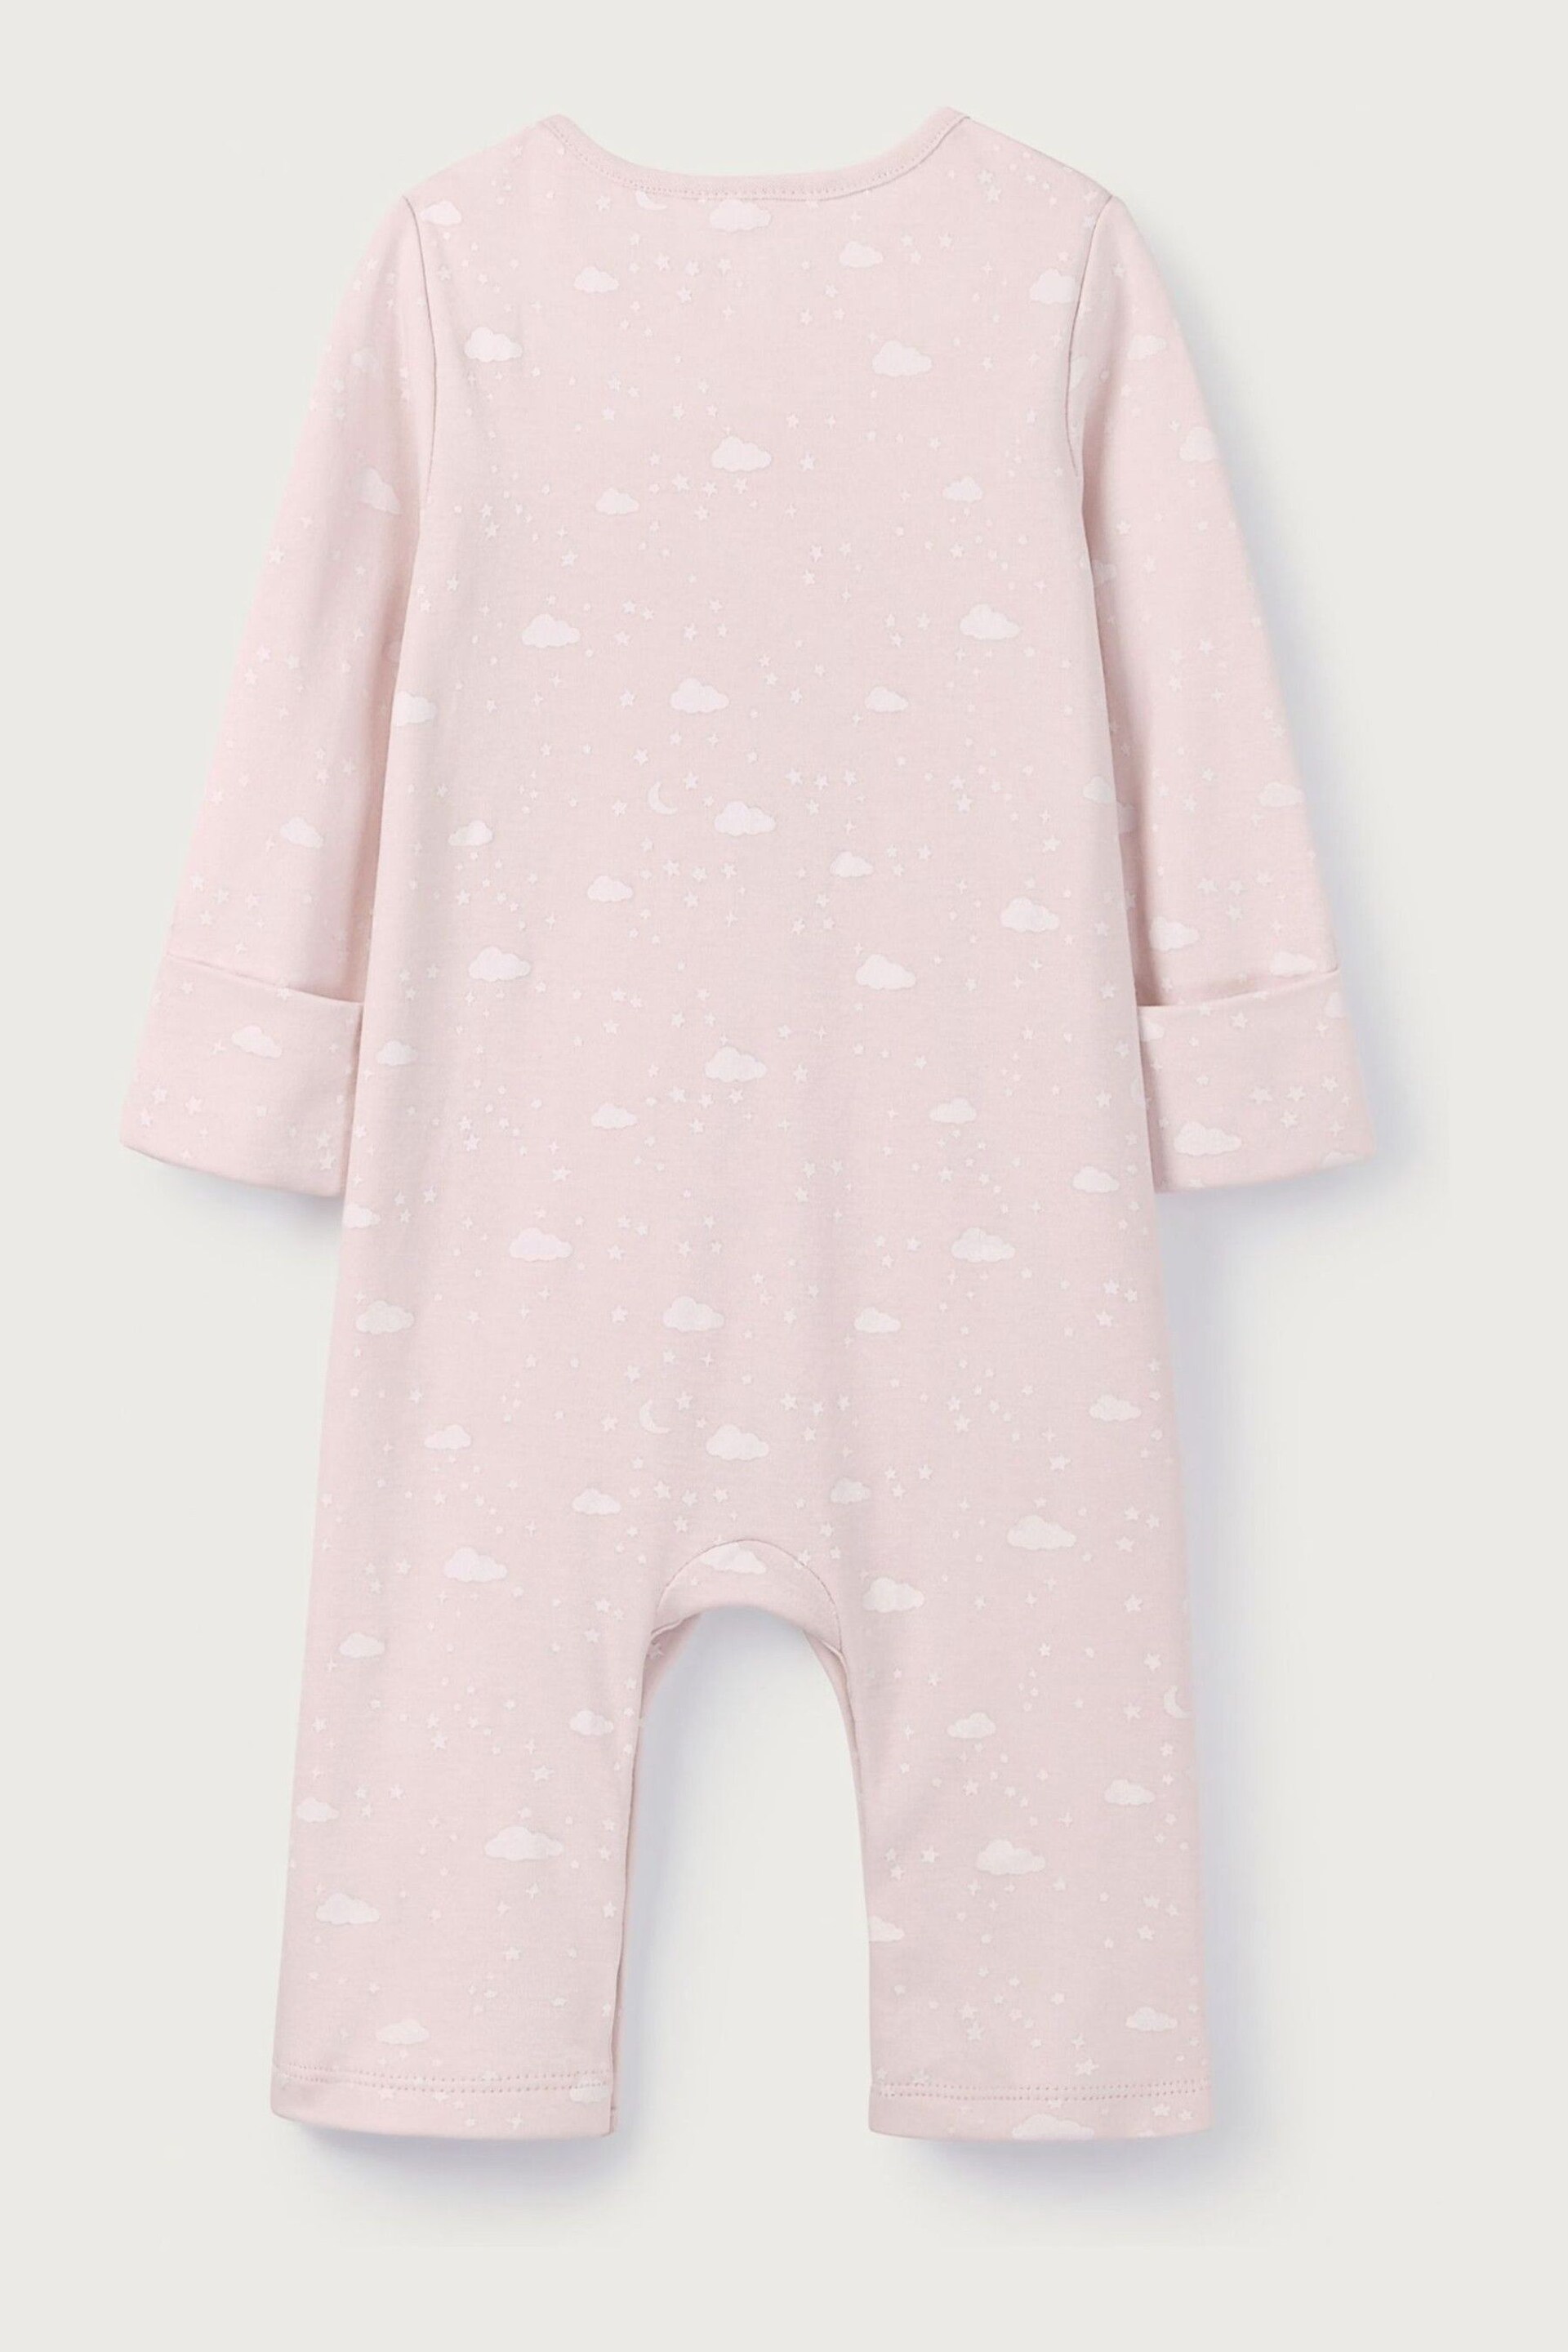 The White Company Pink Cotton Cloud Print Sleepsuit - Image 5 of 5